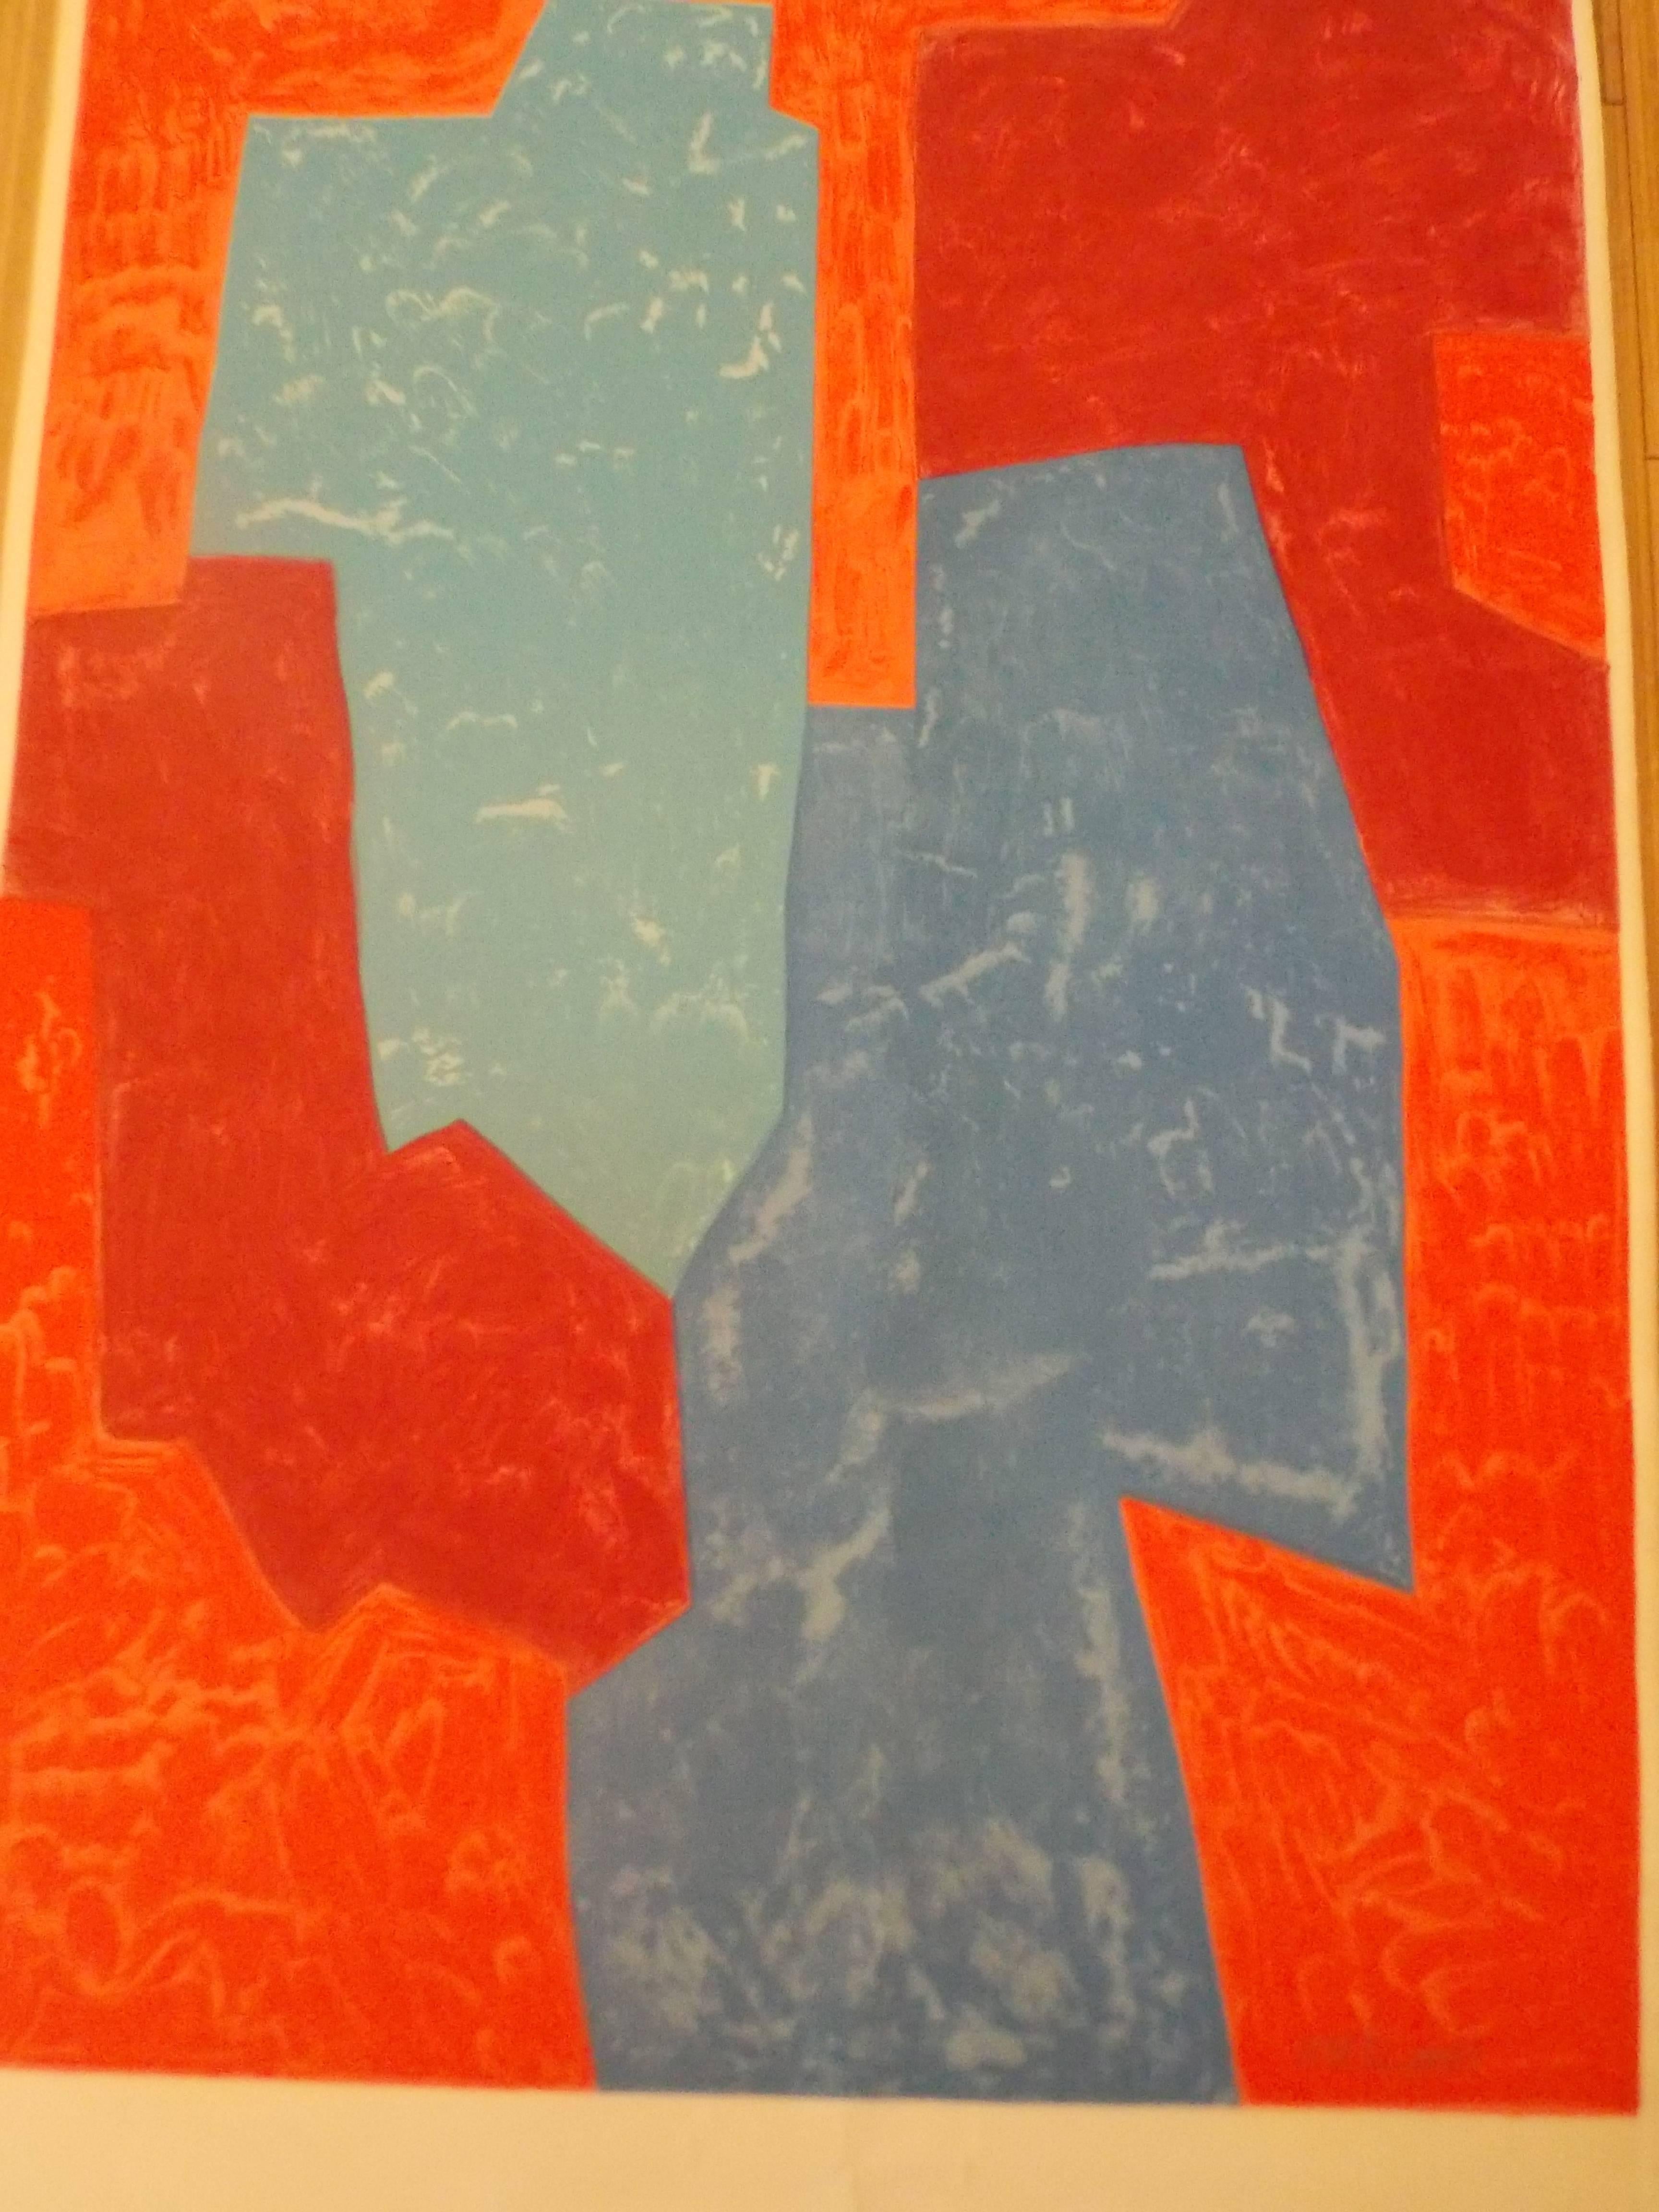 1900-1969.
A nice modernist print.
Paint on thick paper.
This appears to be number #37 from an edition of #65 from the Museum of Modern Art France.
It shows minor undulations and some buckling, no tares.
Other than that, it's in good vintage